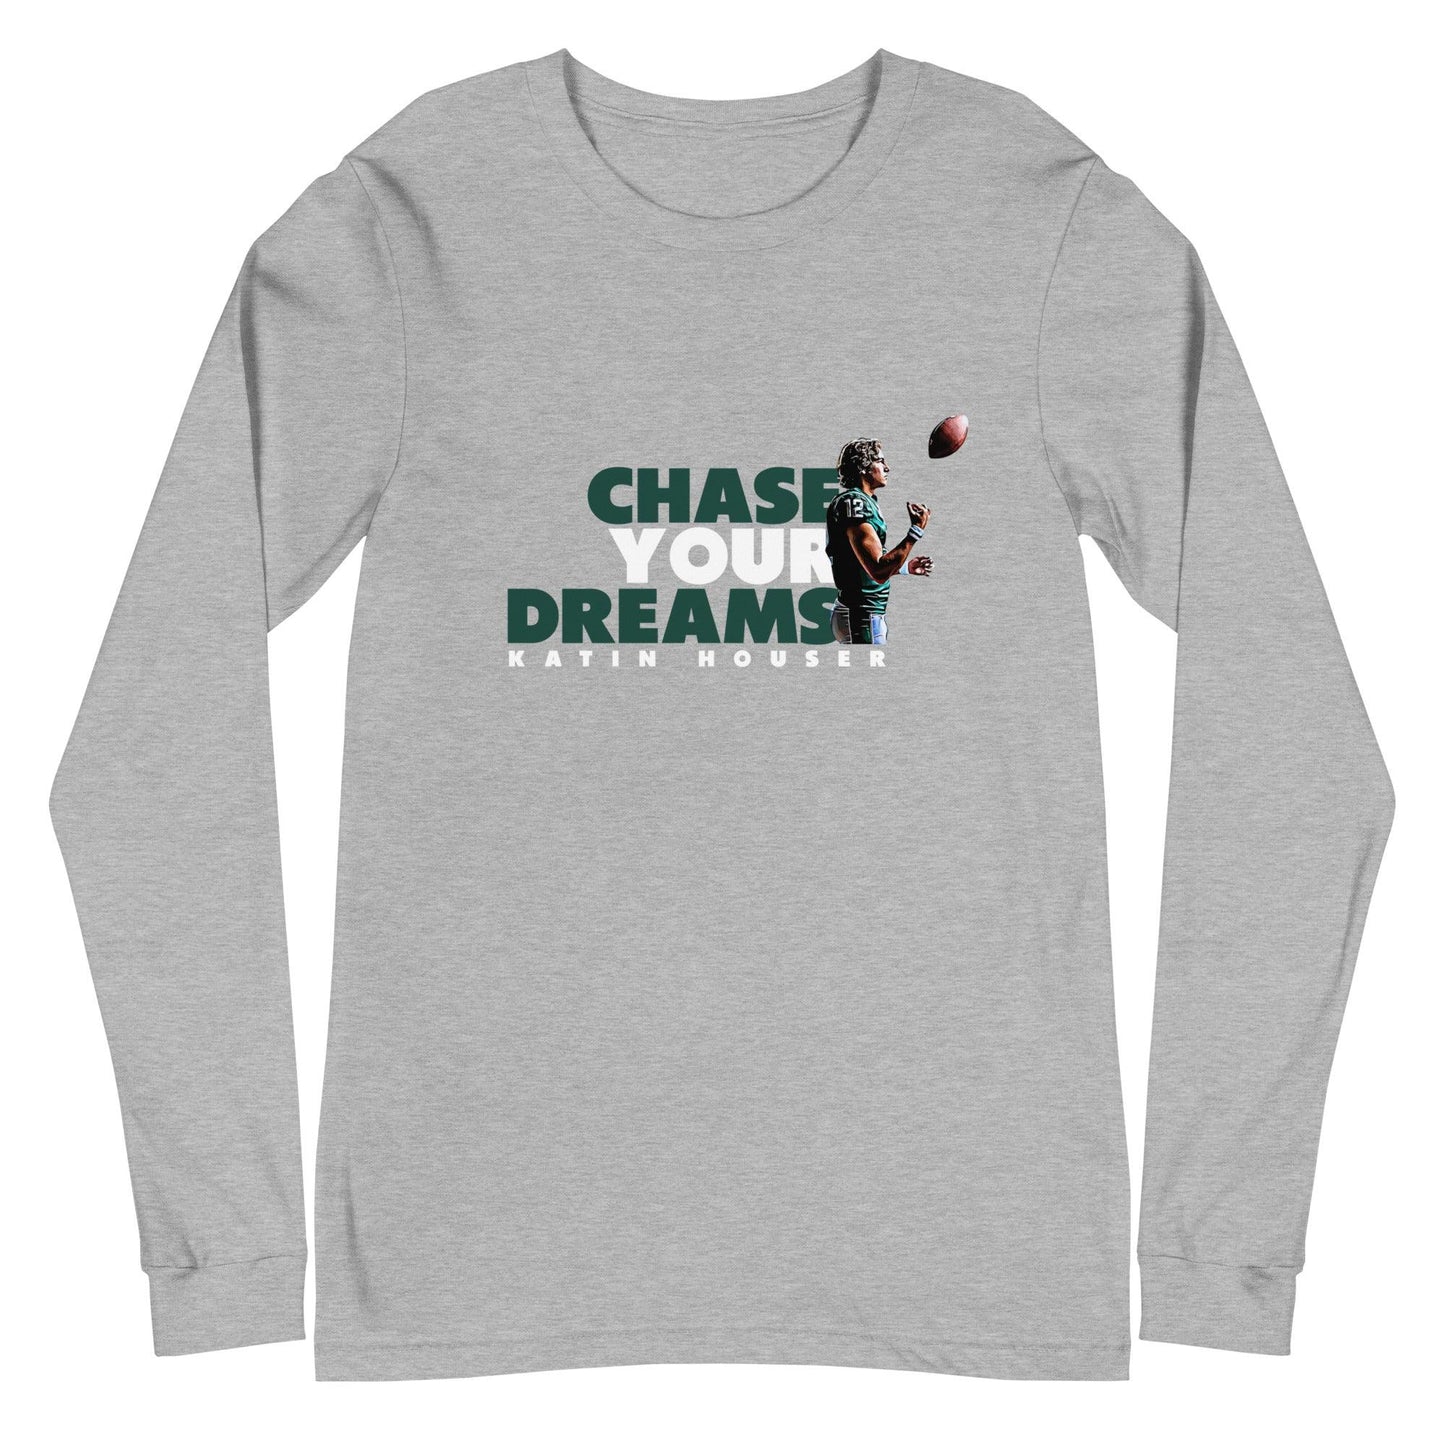 Katin Houser "Chase Your Dreams" Long Sleeve Tee - Fan Arch